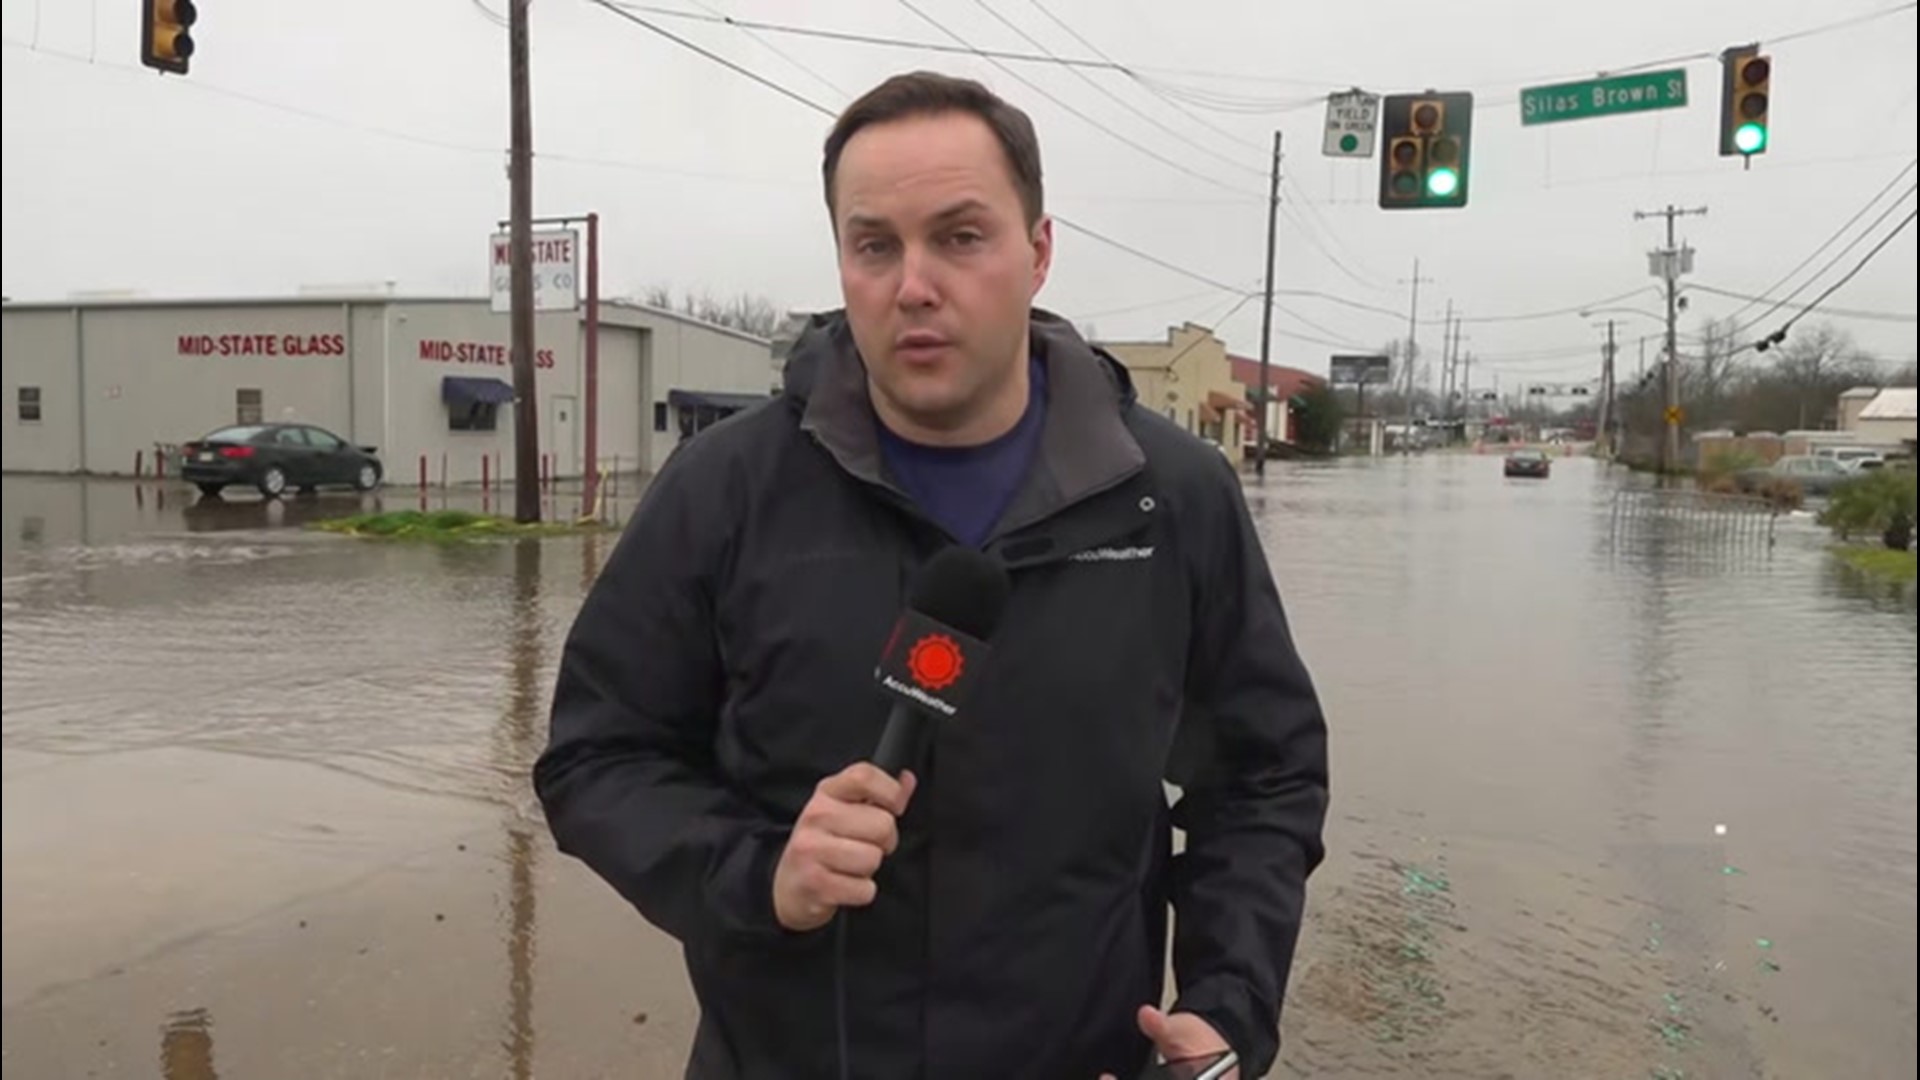 The nearby Pearl River is expected to crest, triggering a flood emergency in Jackson, Mississippi, on Feb. 17. AccuWeather's Bill Wadell has the story.